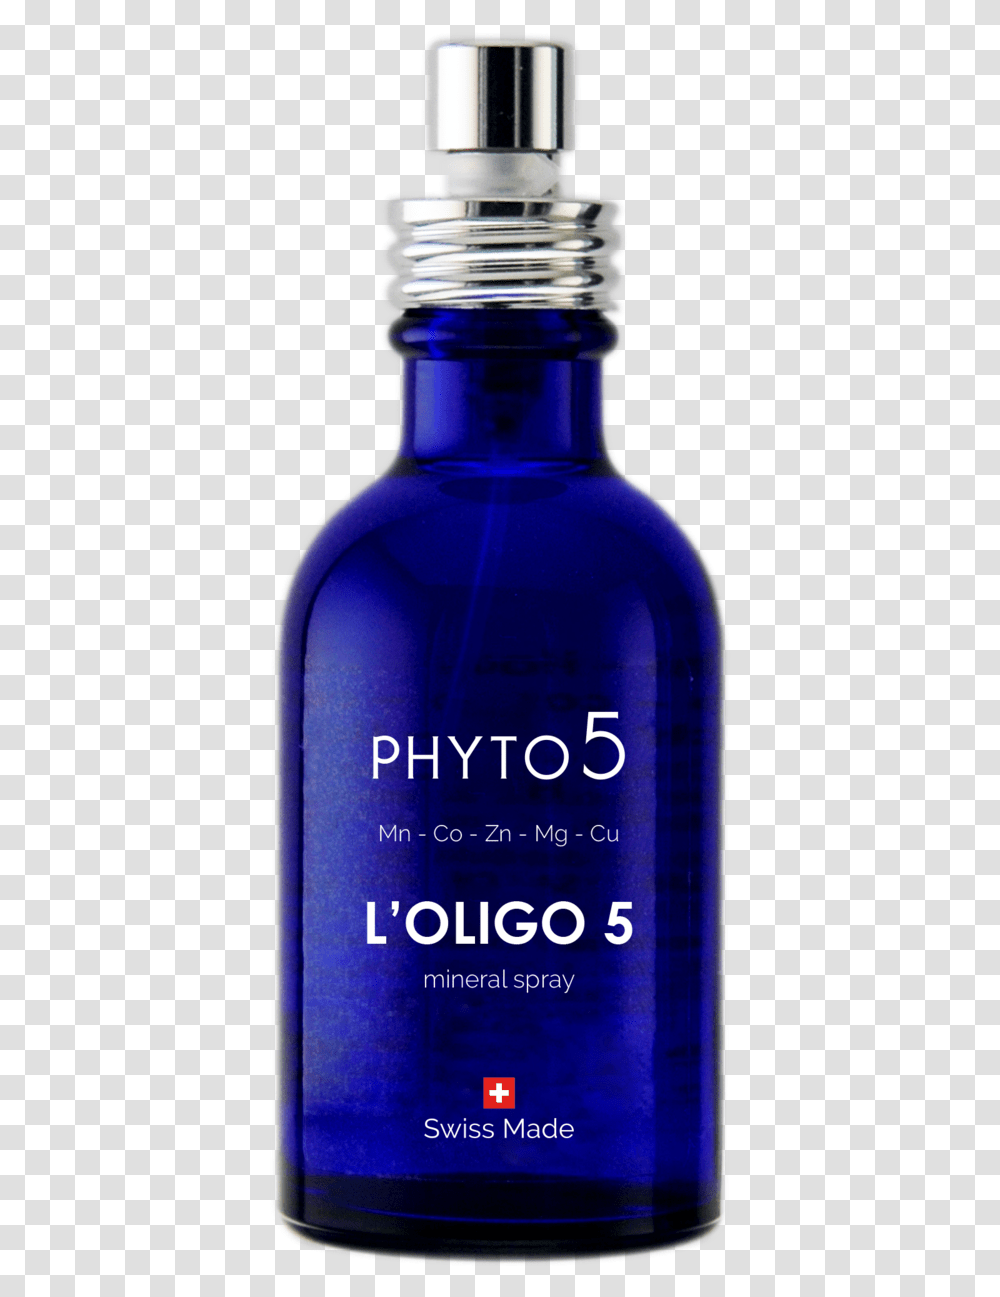 Mineral Spray Phyto5 Perfume, Bottle, Cosmetics, Liquor, Alcohol Transparent Png